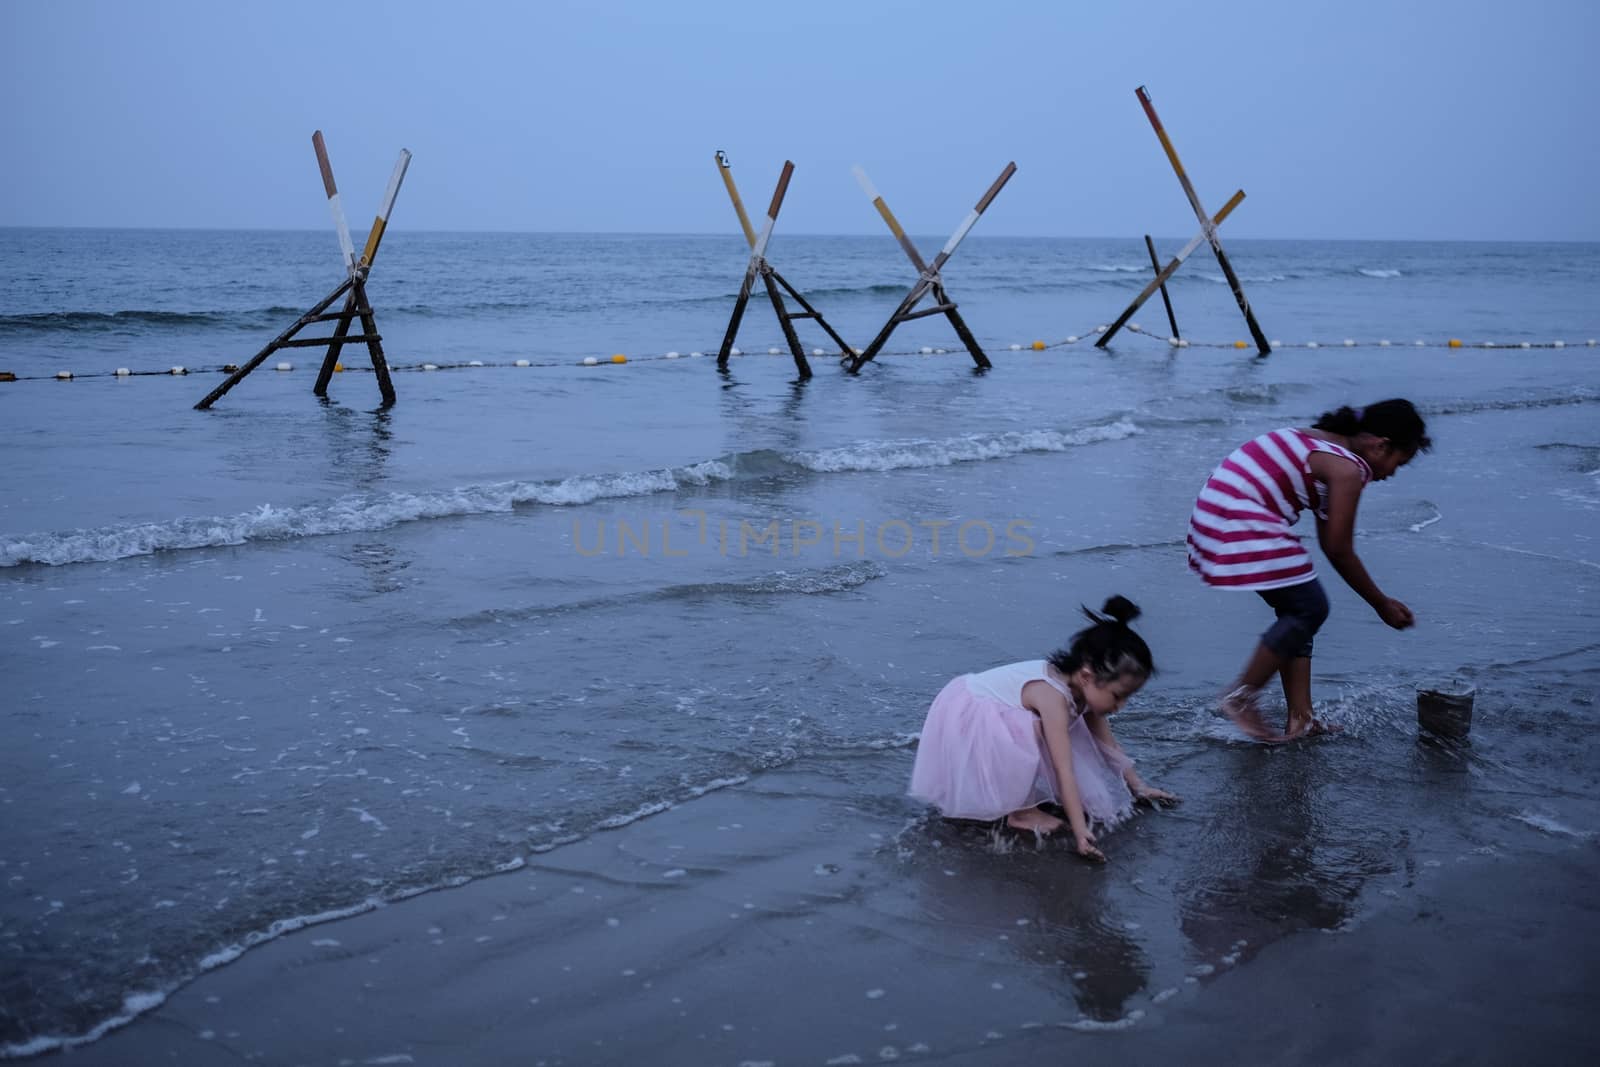 MALAYSIA, Kuala Terengganu:  Two young girls play on the beach in Kuala Terengganu, Malaysia on September 21, 2015. Haze covered Malaysia for several days, but cleared on Monday morning. The country suffers from poor air quality and the haze often blankets the region. Malaysia and neighboring countries are trying to figure out a way to combat the haze which causes problems in the area.